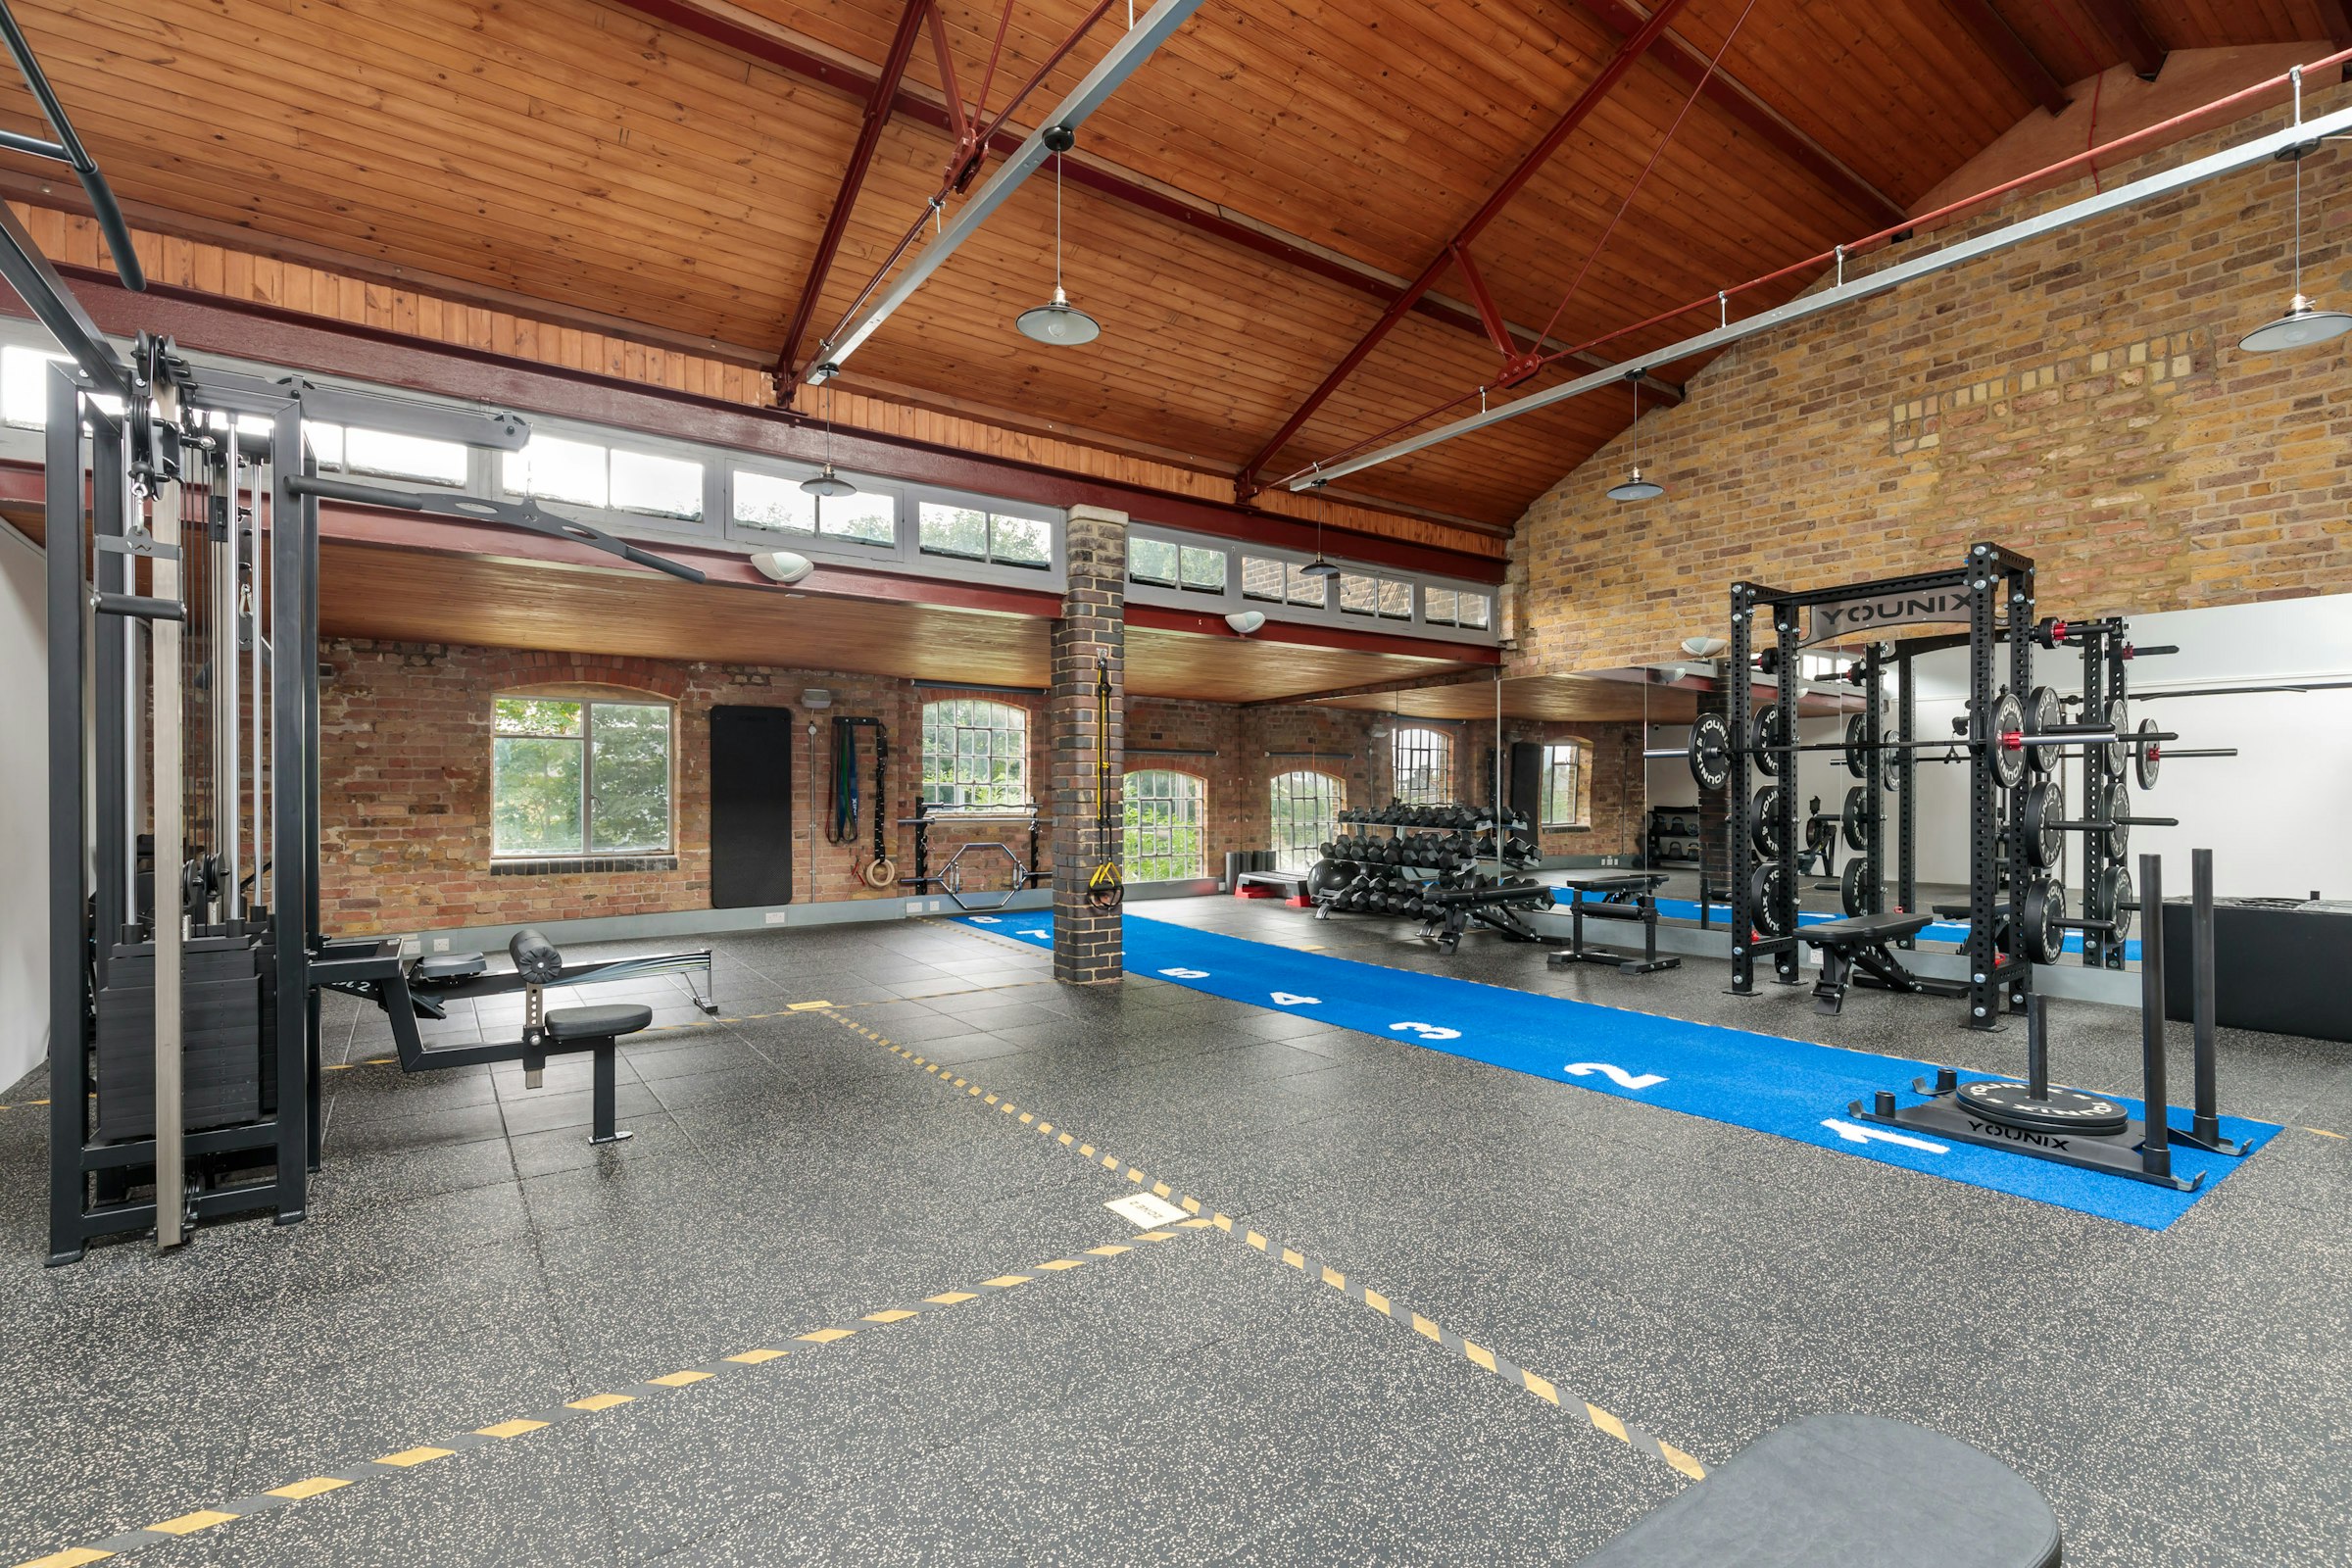 Loft-style gym to rent